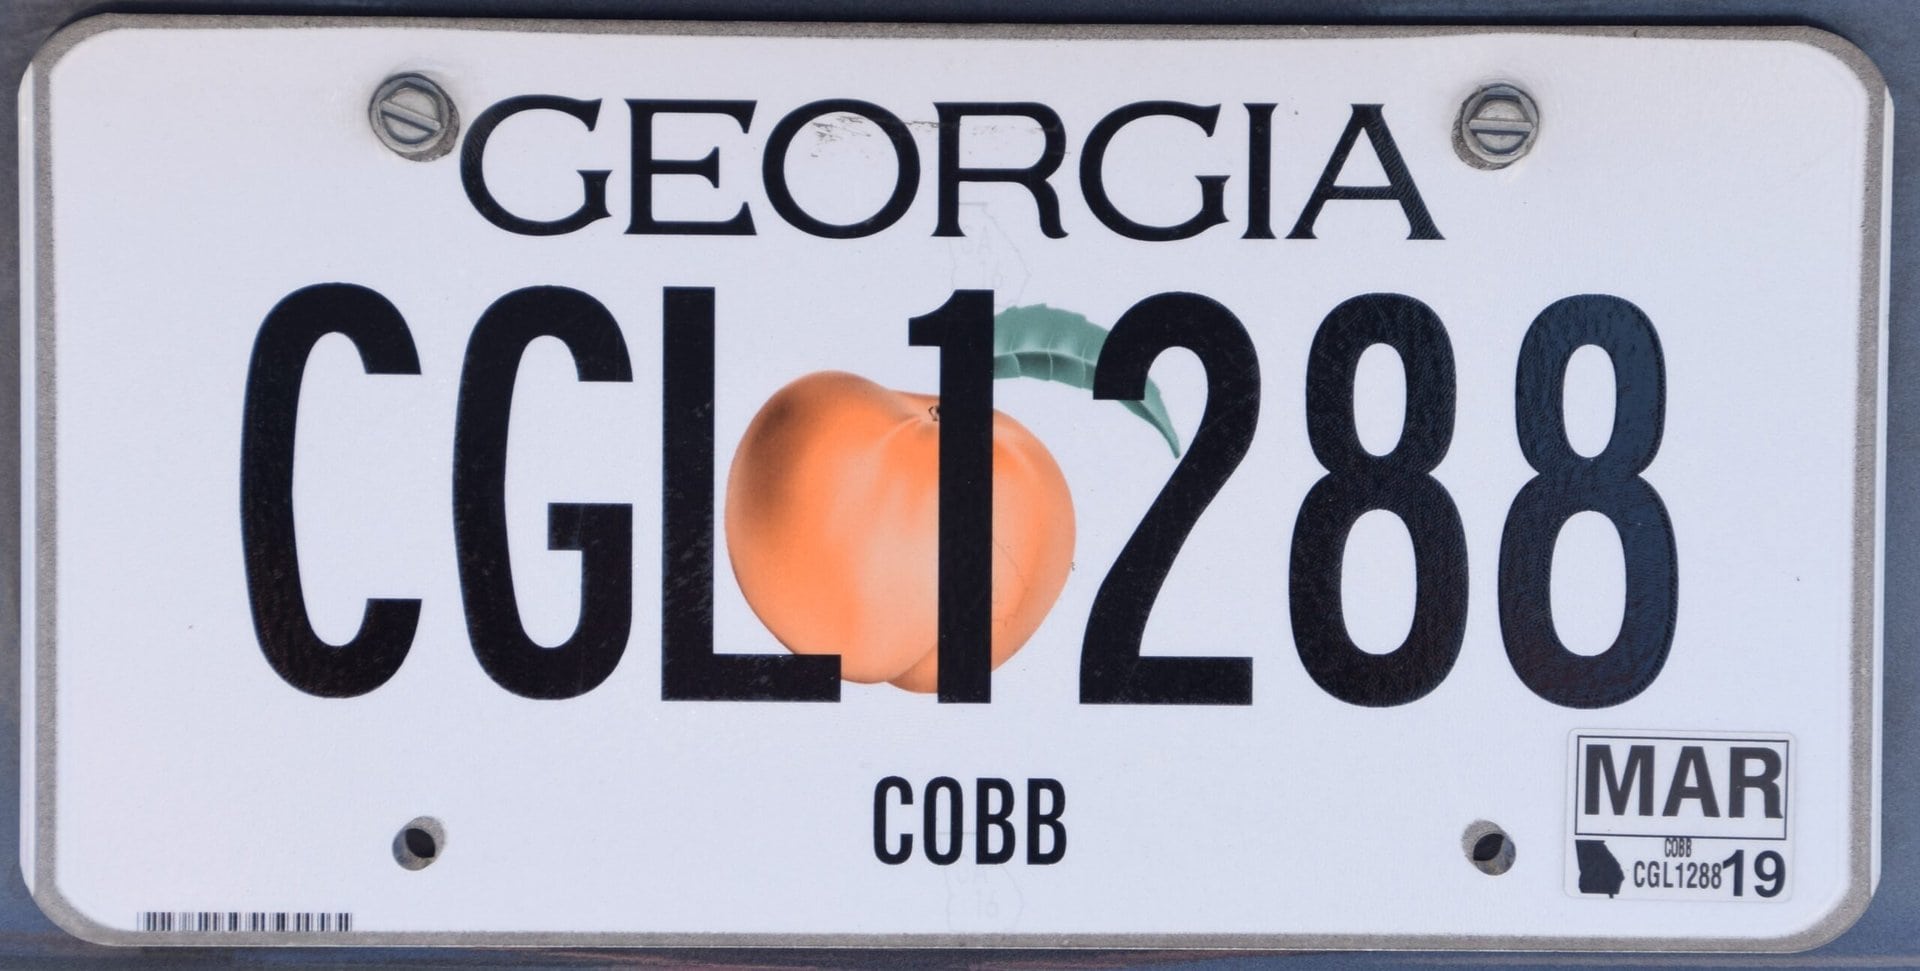 How Much is a Car Tag in Georgia